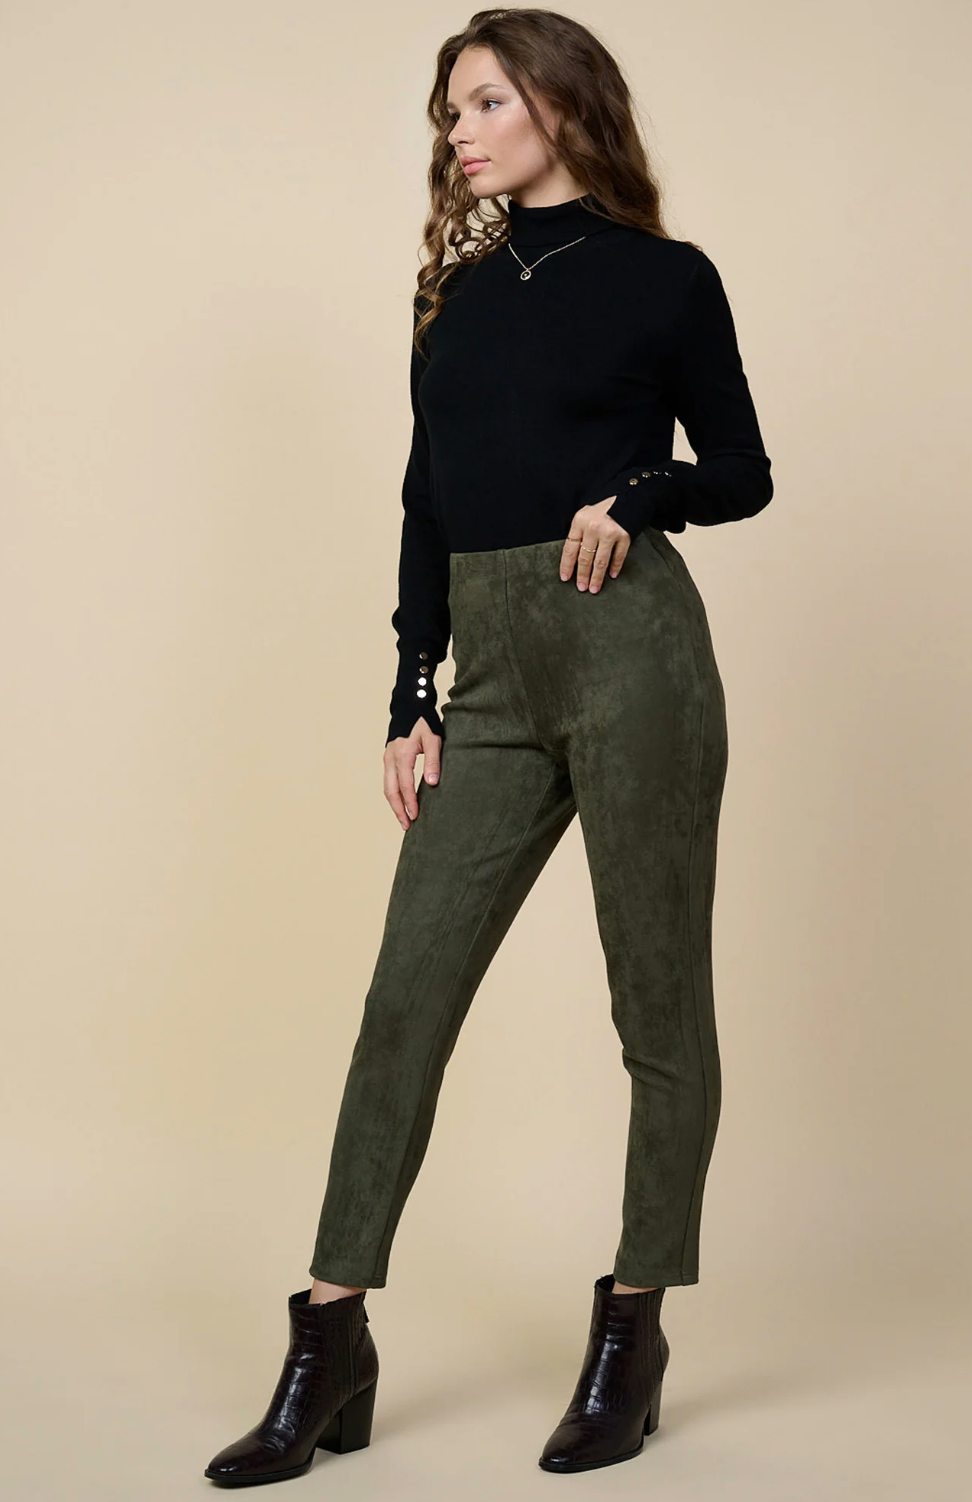 Faux Suede Leggings - The Rusty Willow Boutique